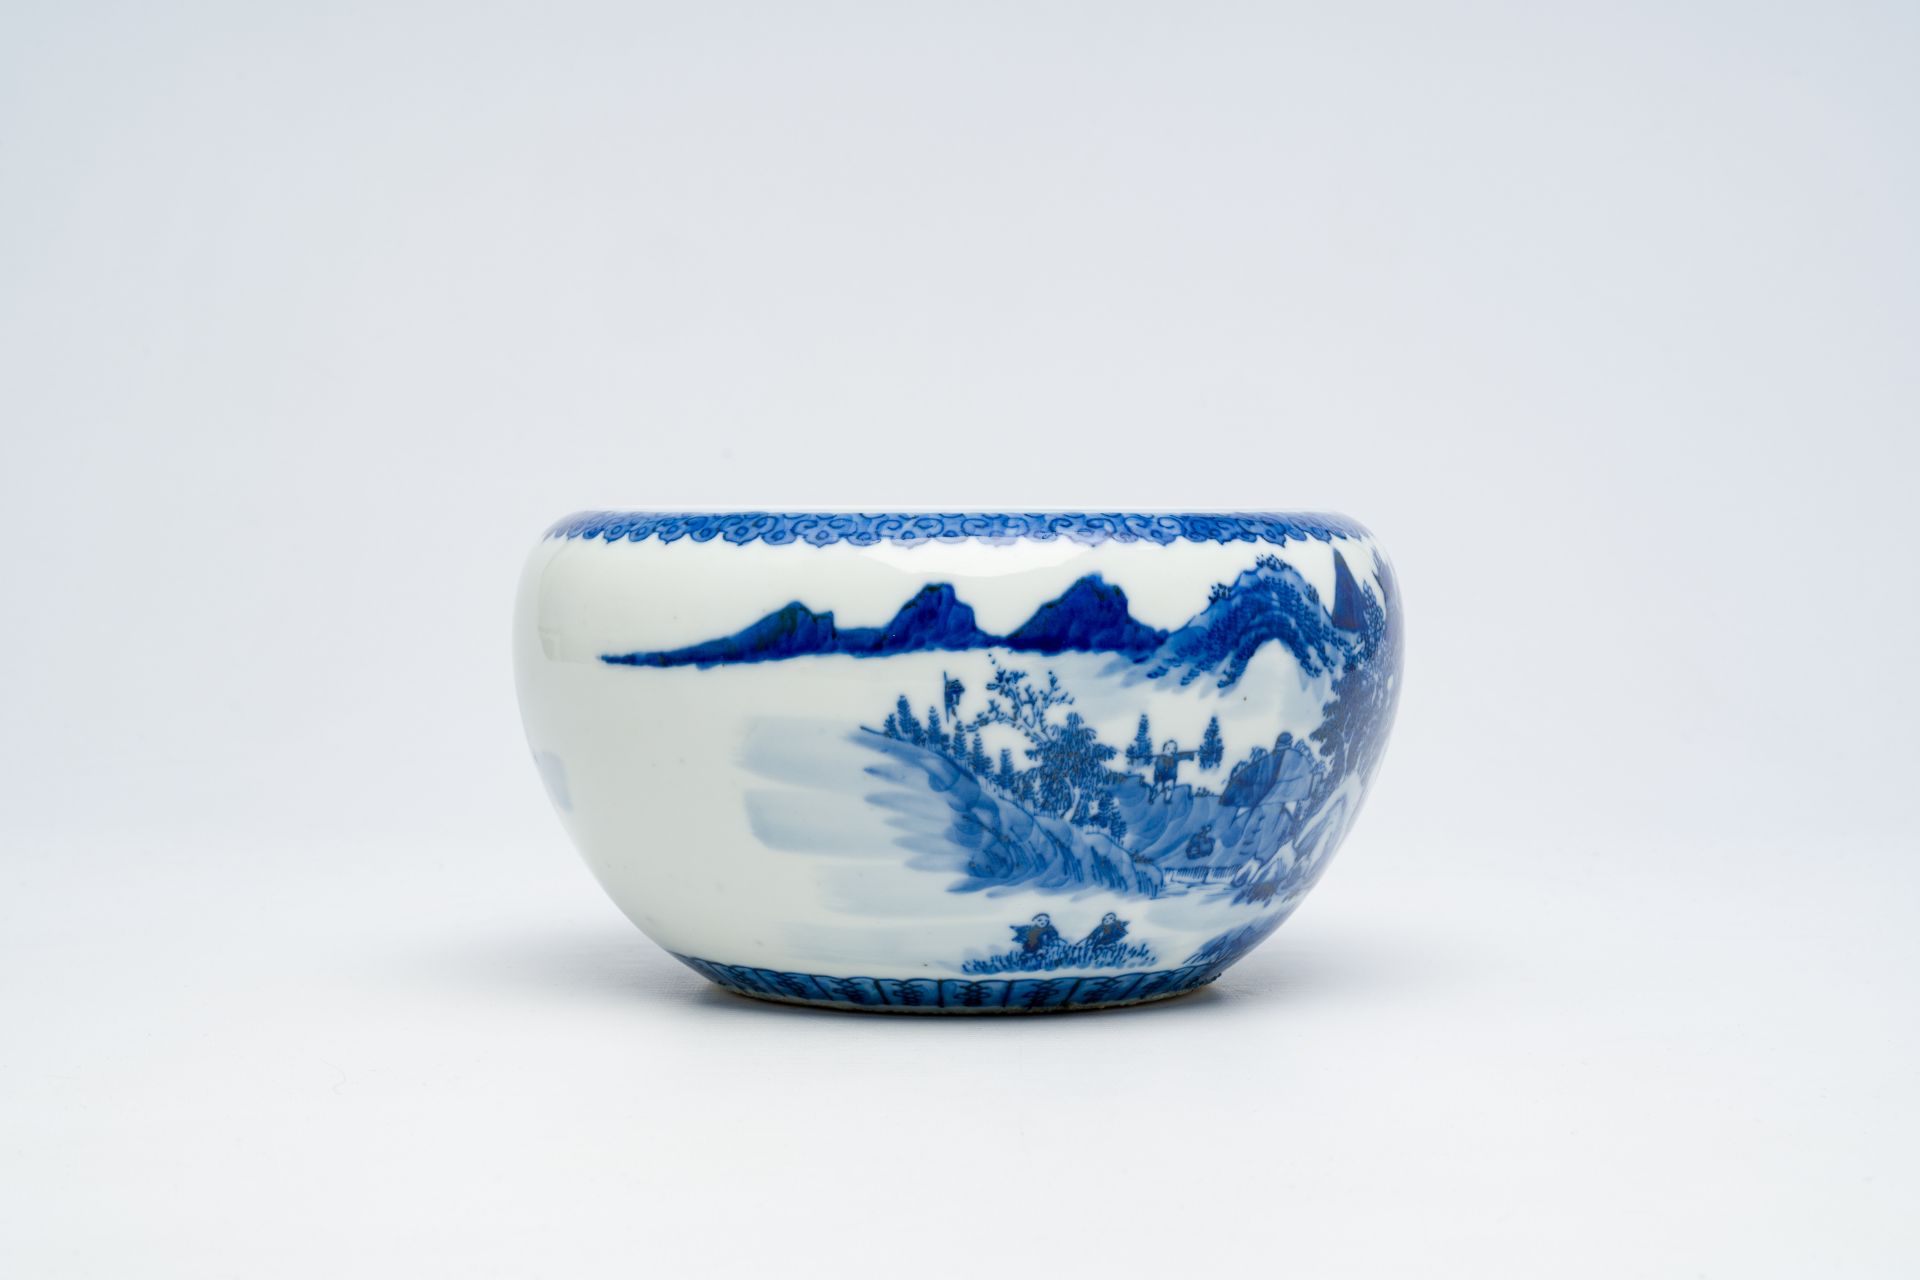 A varied collection of Chinese blue and white porcelain, 19th/20th C. - Image 26 of 30